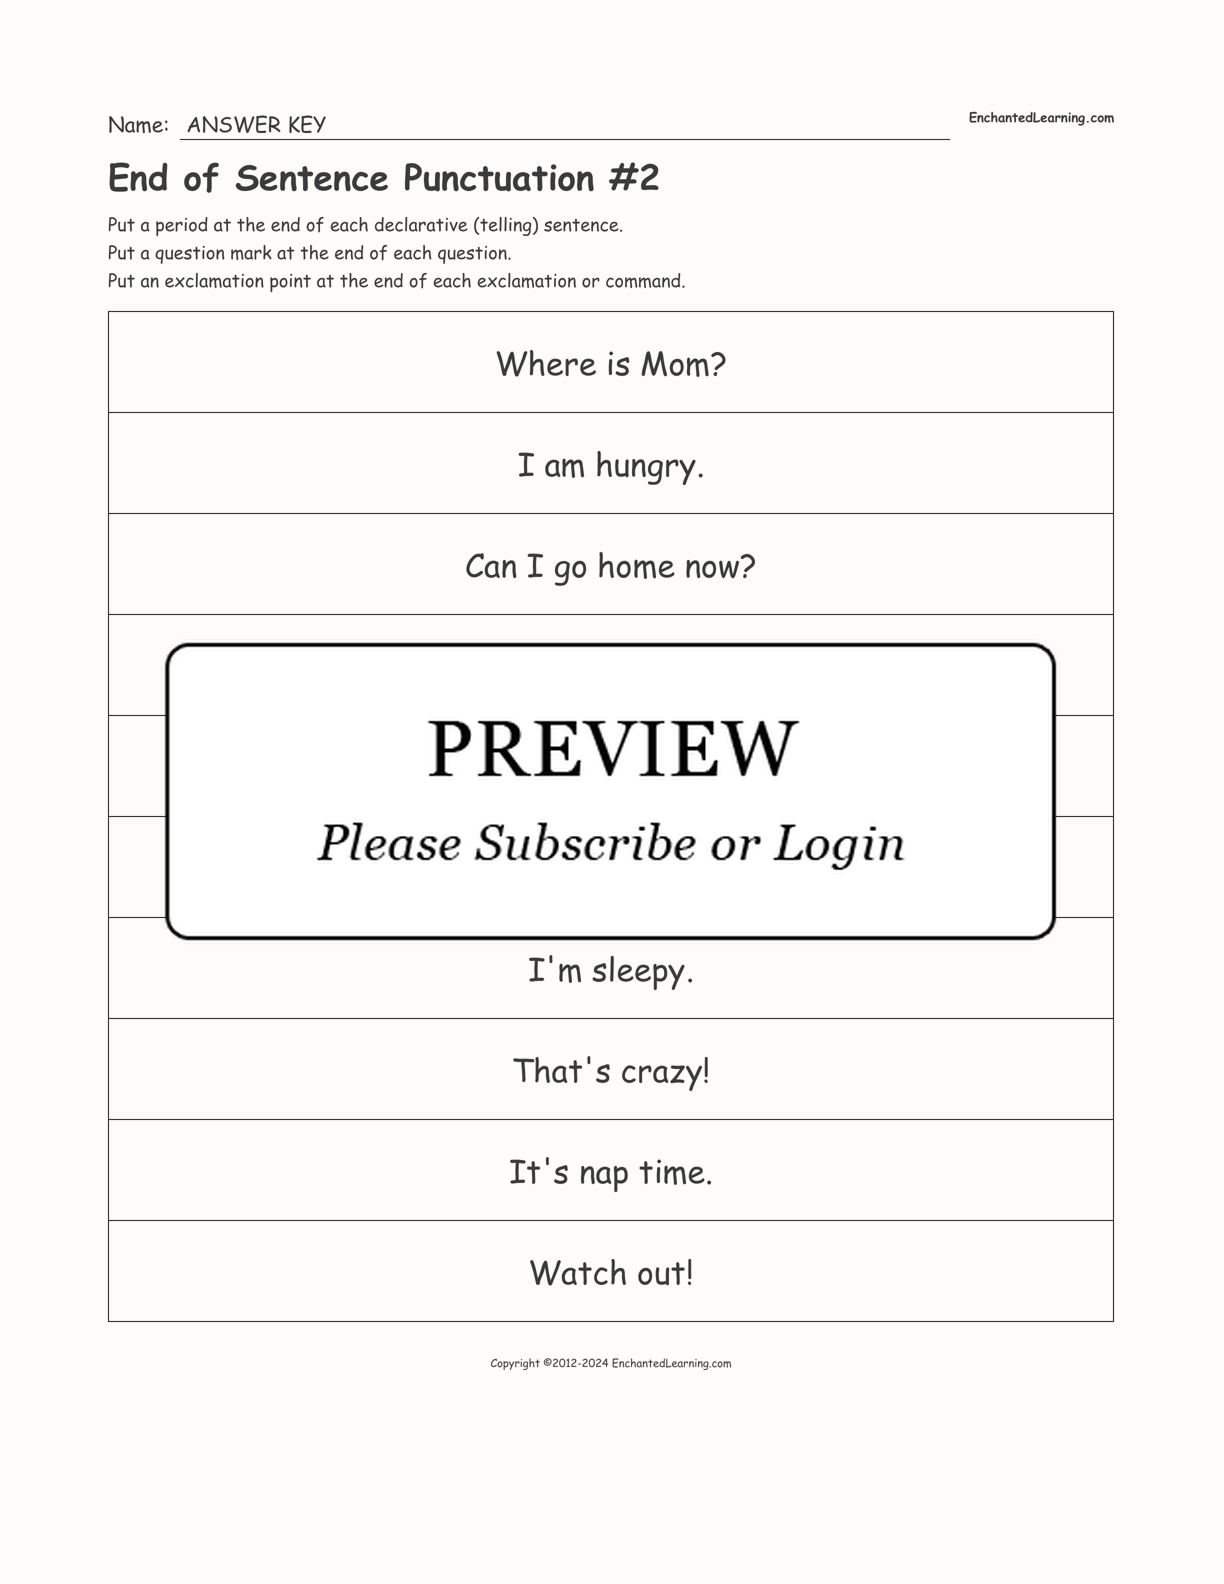 End of Sentence Punctuation #2 interactive worksheet page 2